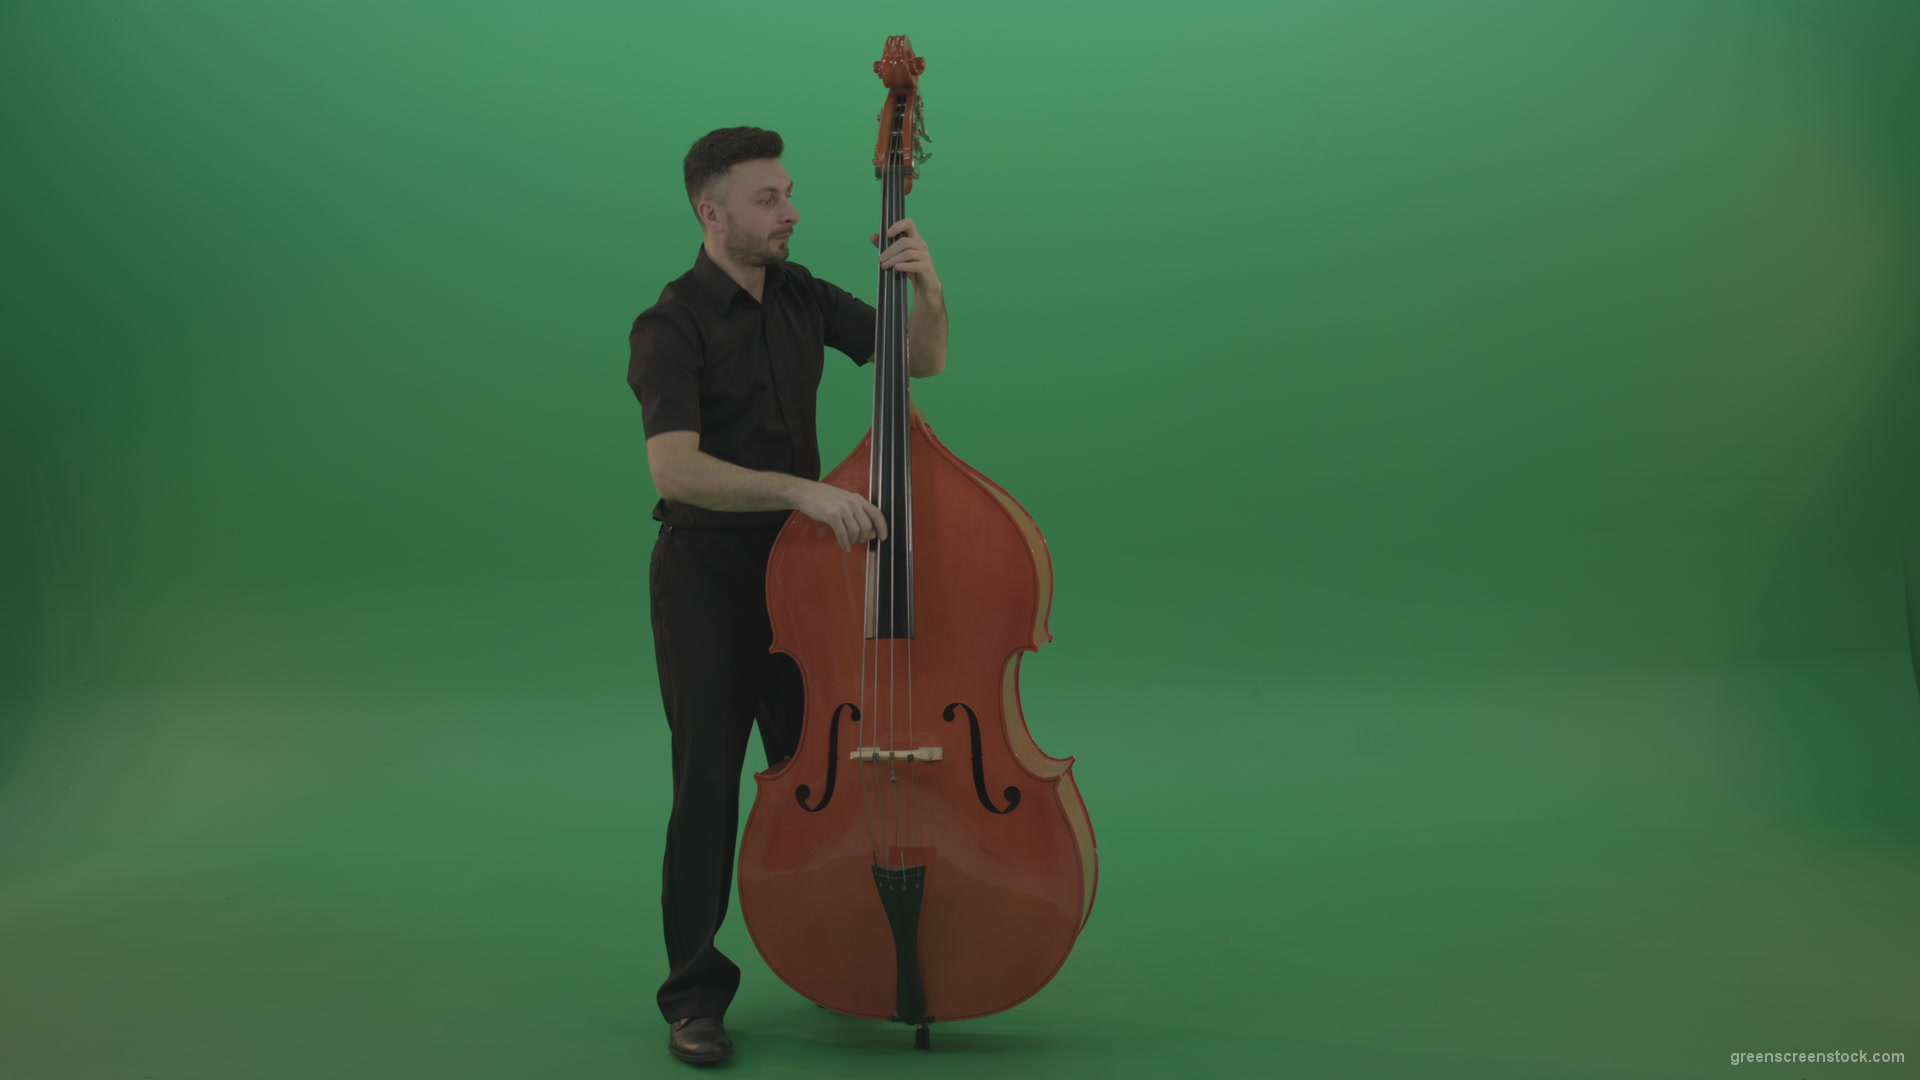 Full-size-man-in-black-uniform-play-jazz-rock-on-double-bass-String-music-instrument-isolated-on-green-screen_006 Green Screen Stock